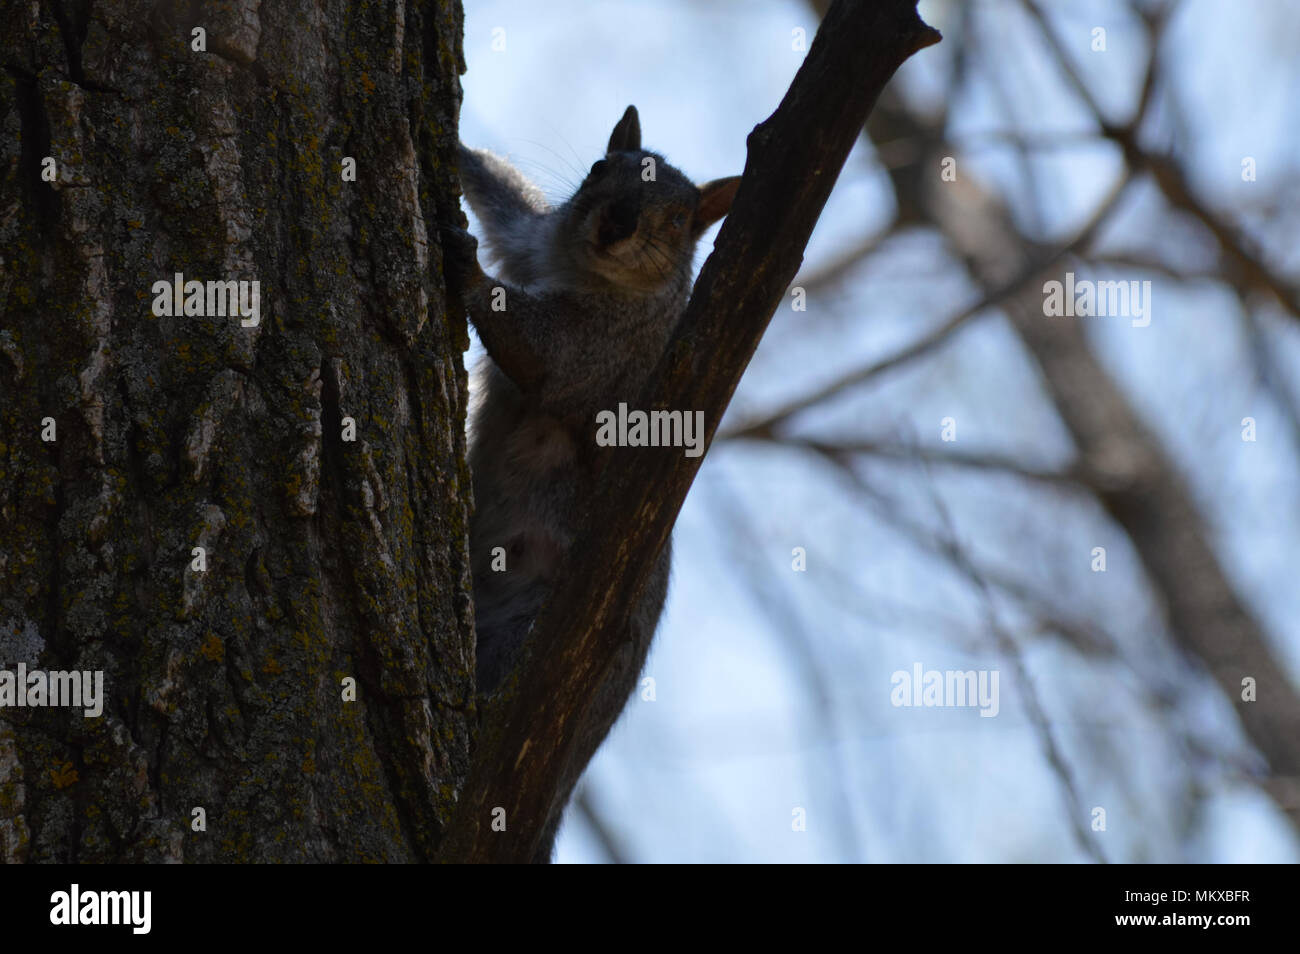 Squirrel on a tree Stock Photo